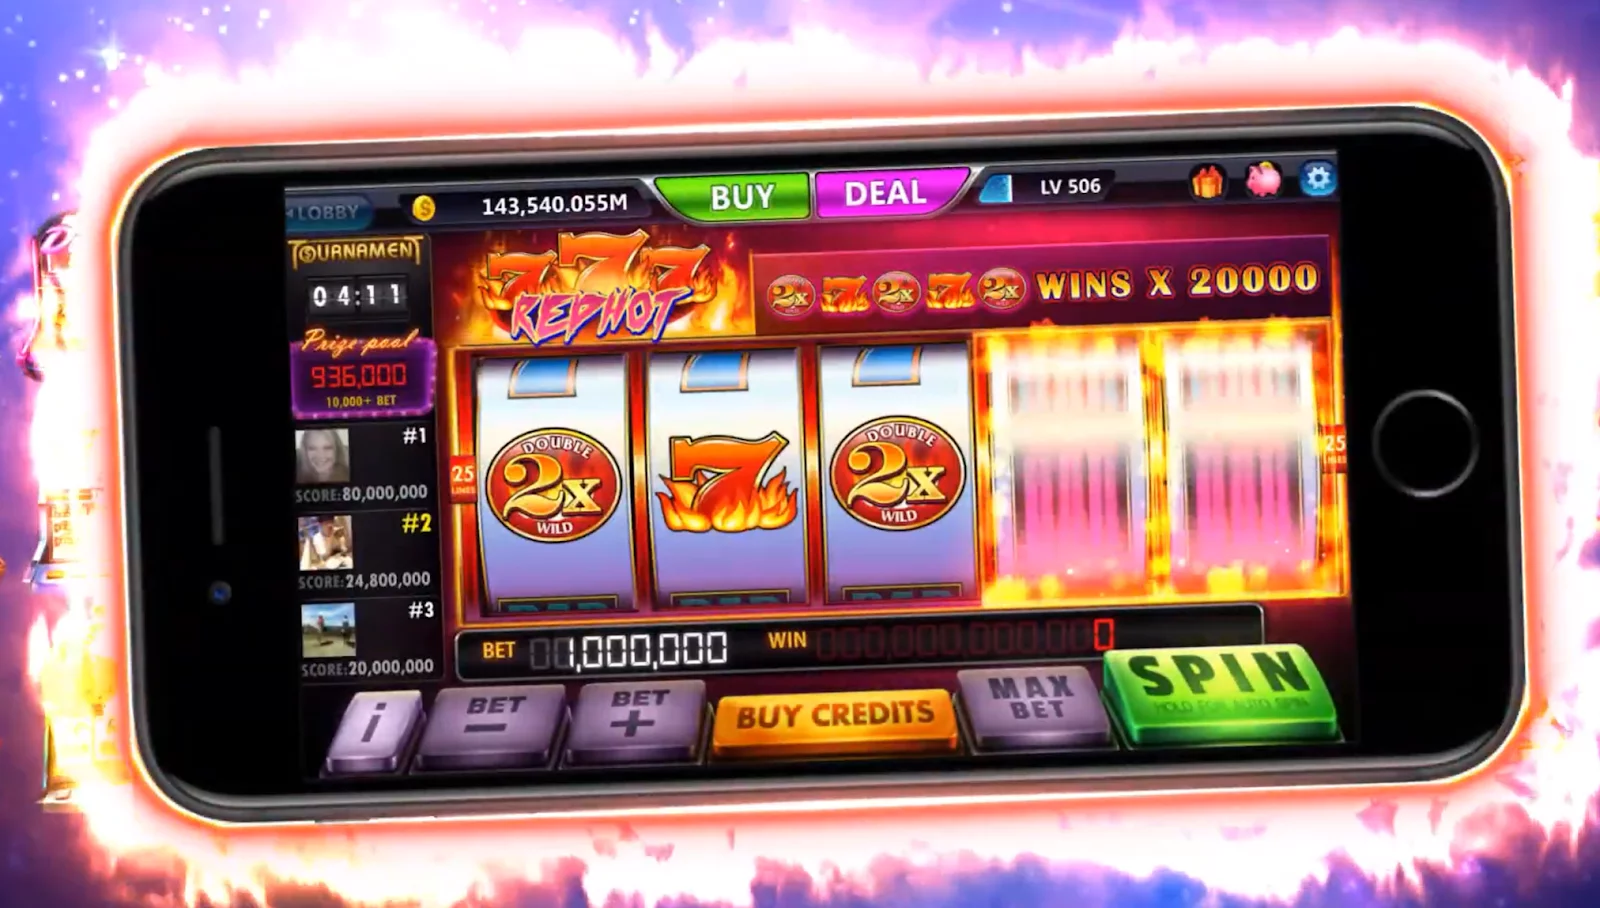 Mobile Slots Free Spins